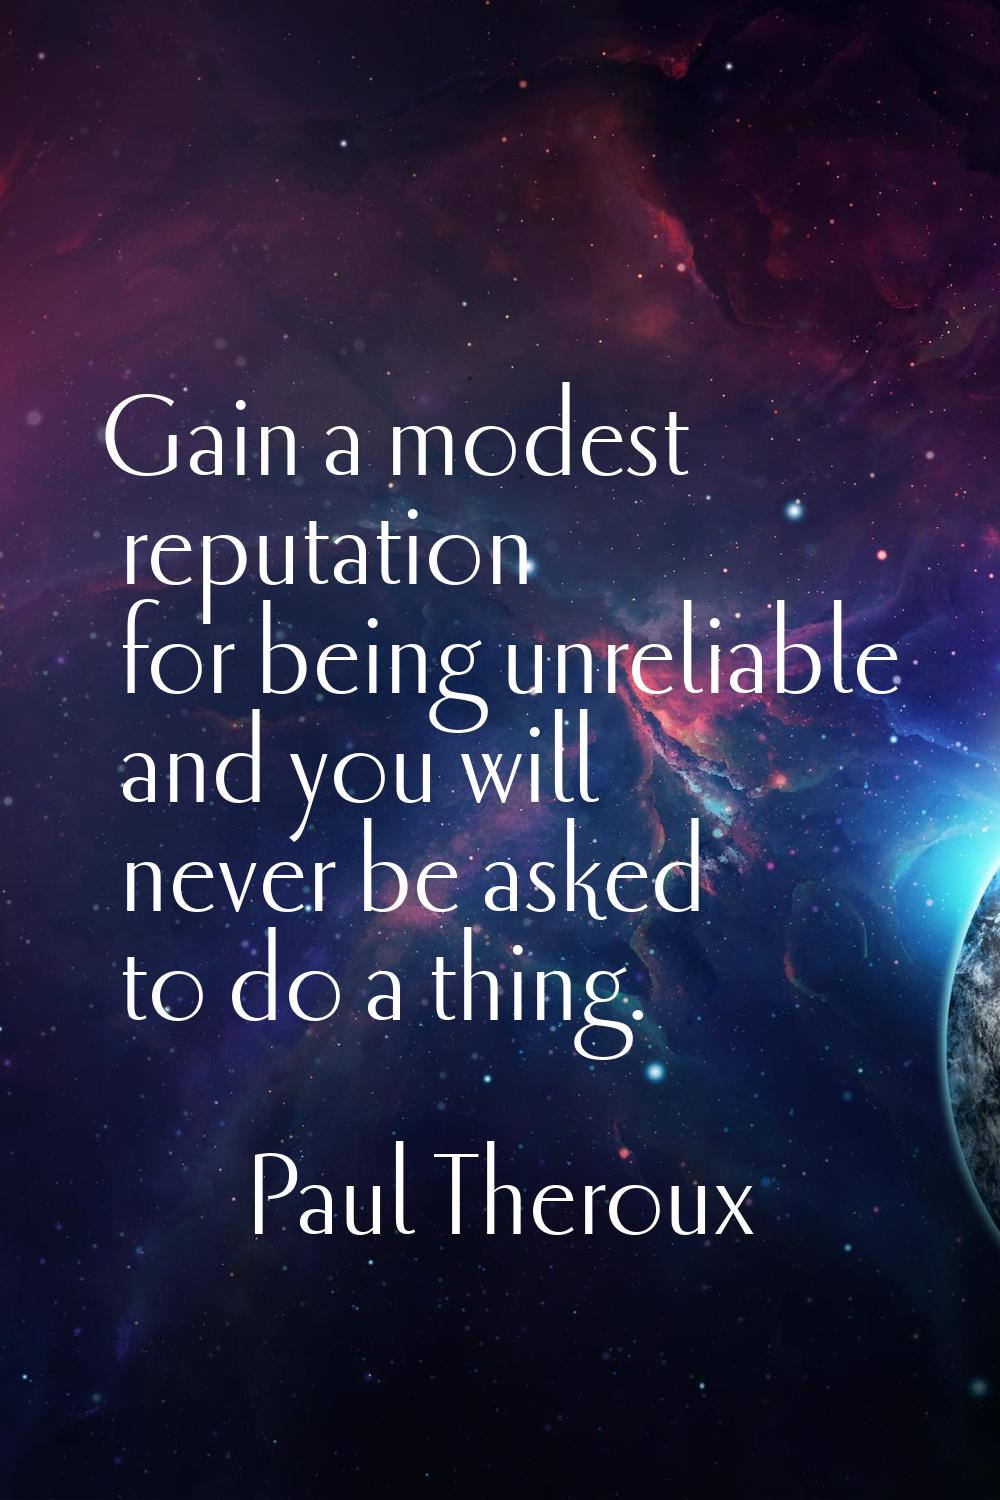 Gain a modest reputation for being unreliable and you will never be asked to do a thing.